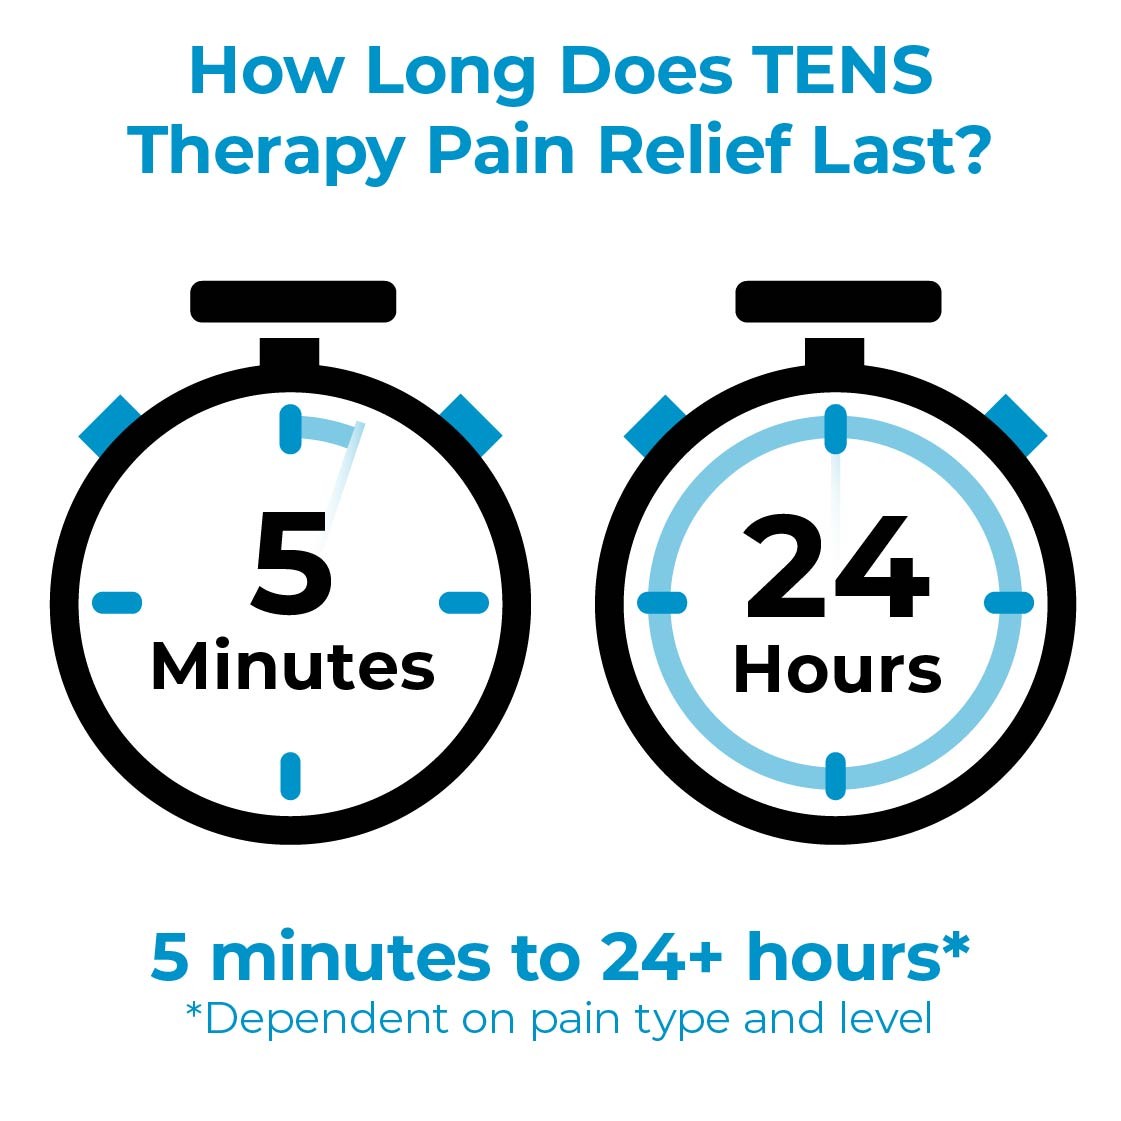 How long does TENS therapy last? Five minutes to 24+ hours depending on pain type and level